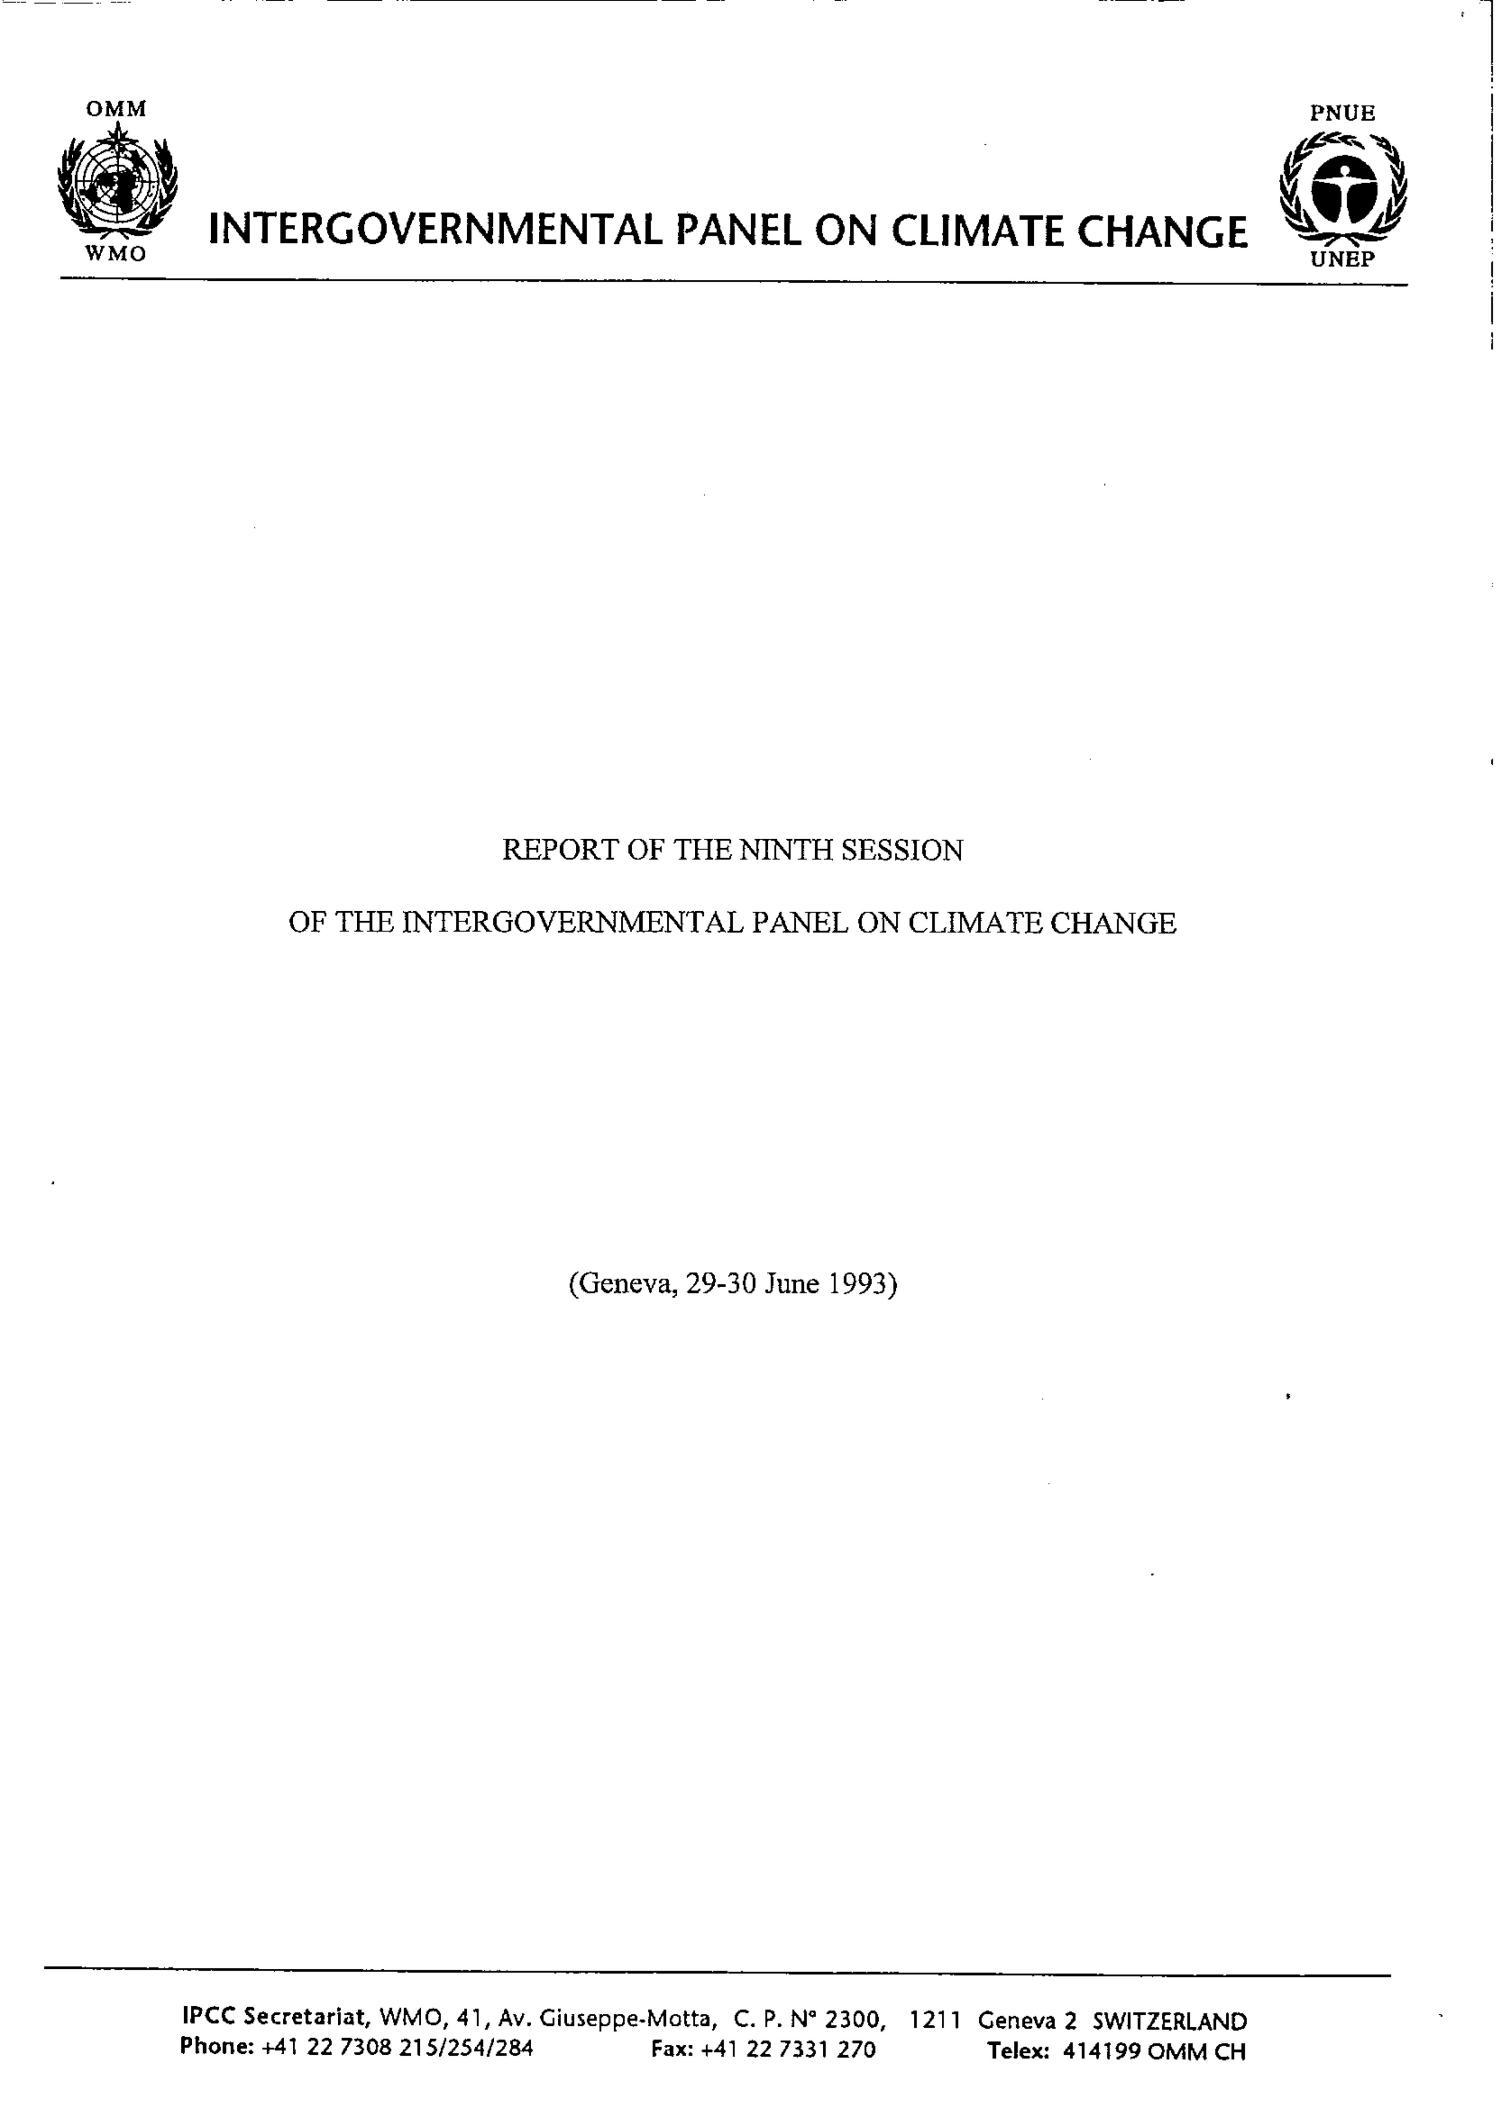 Report of the Ninth Session of the Intergovernmental Panel on Climate Change (IPCC)
                                                
                                                    Front Cover
                                                